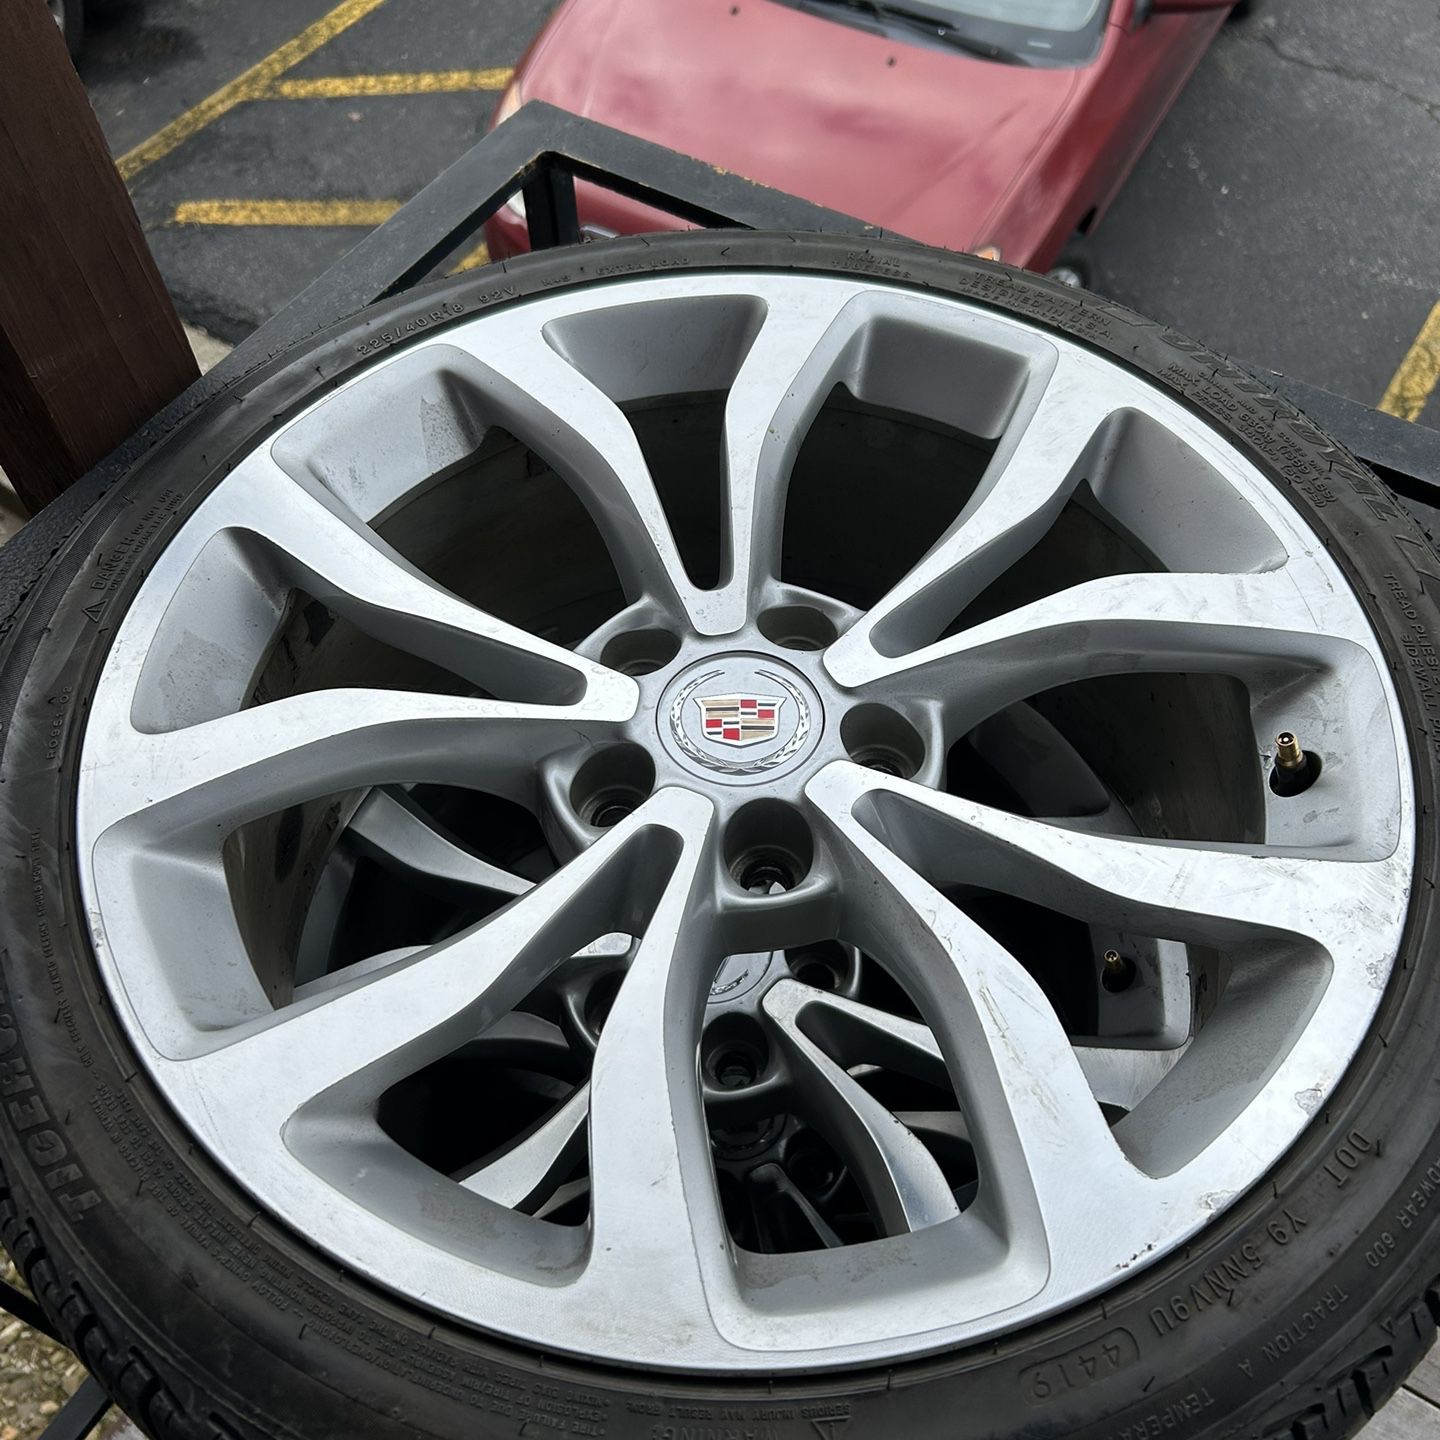 removed)-245 R 4018 inch Cadillac ATS rims and tires firm $1(contact info removed) for the set tires still like New